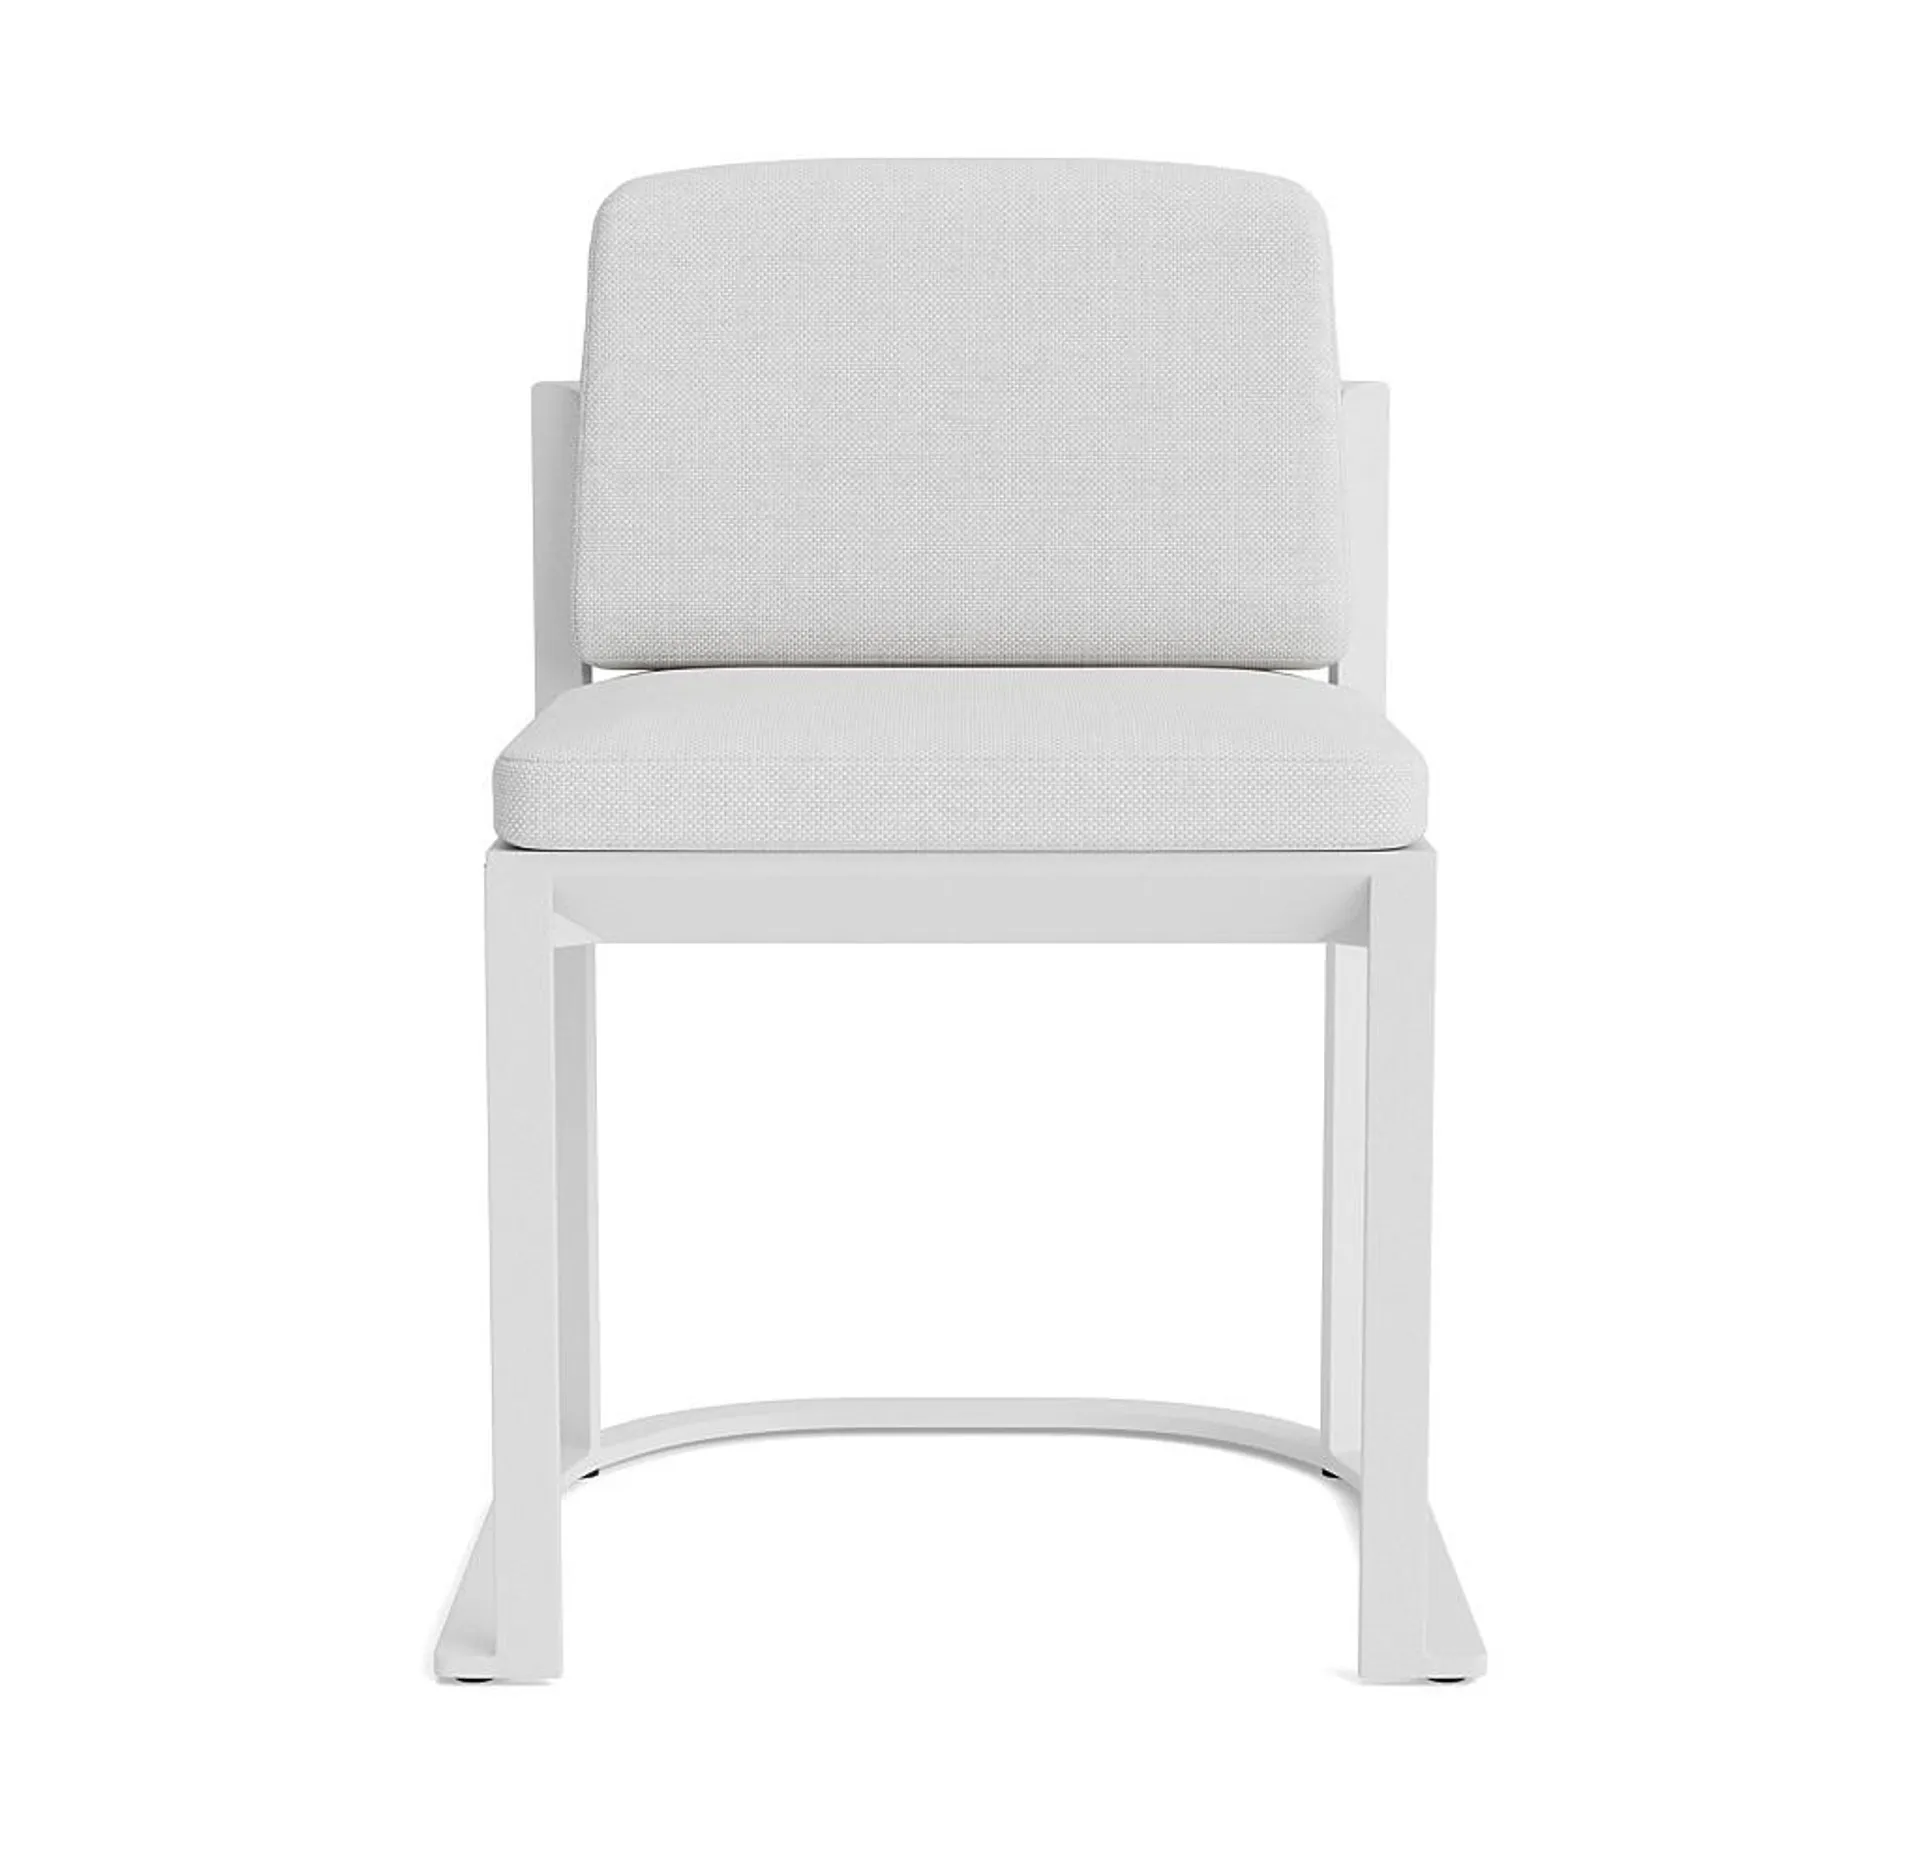 Sanibel Outdoor Side Dining Chair